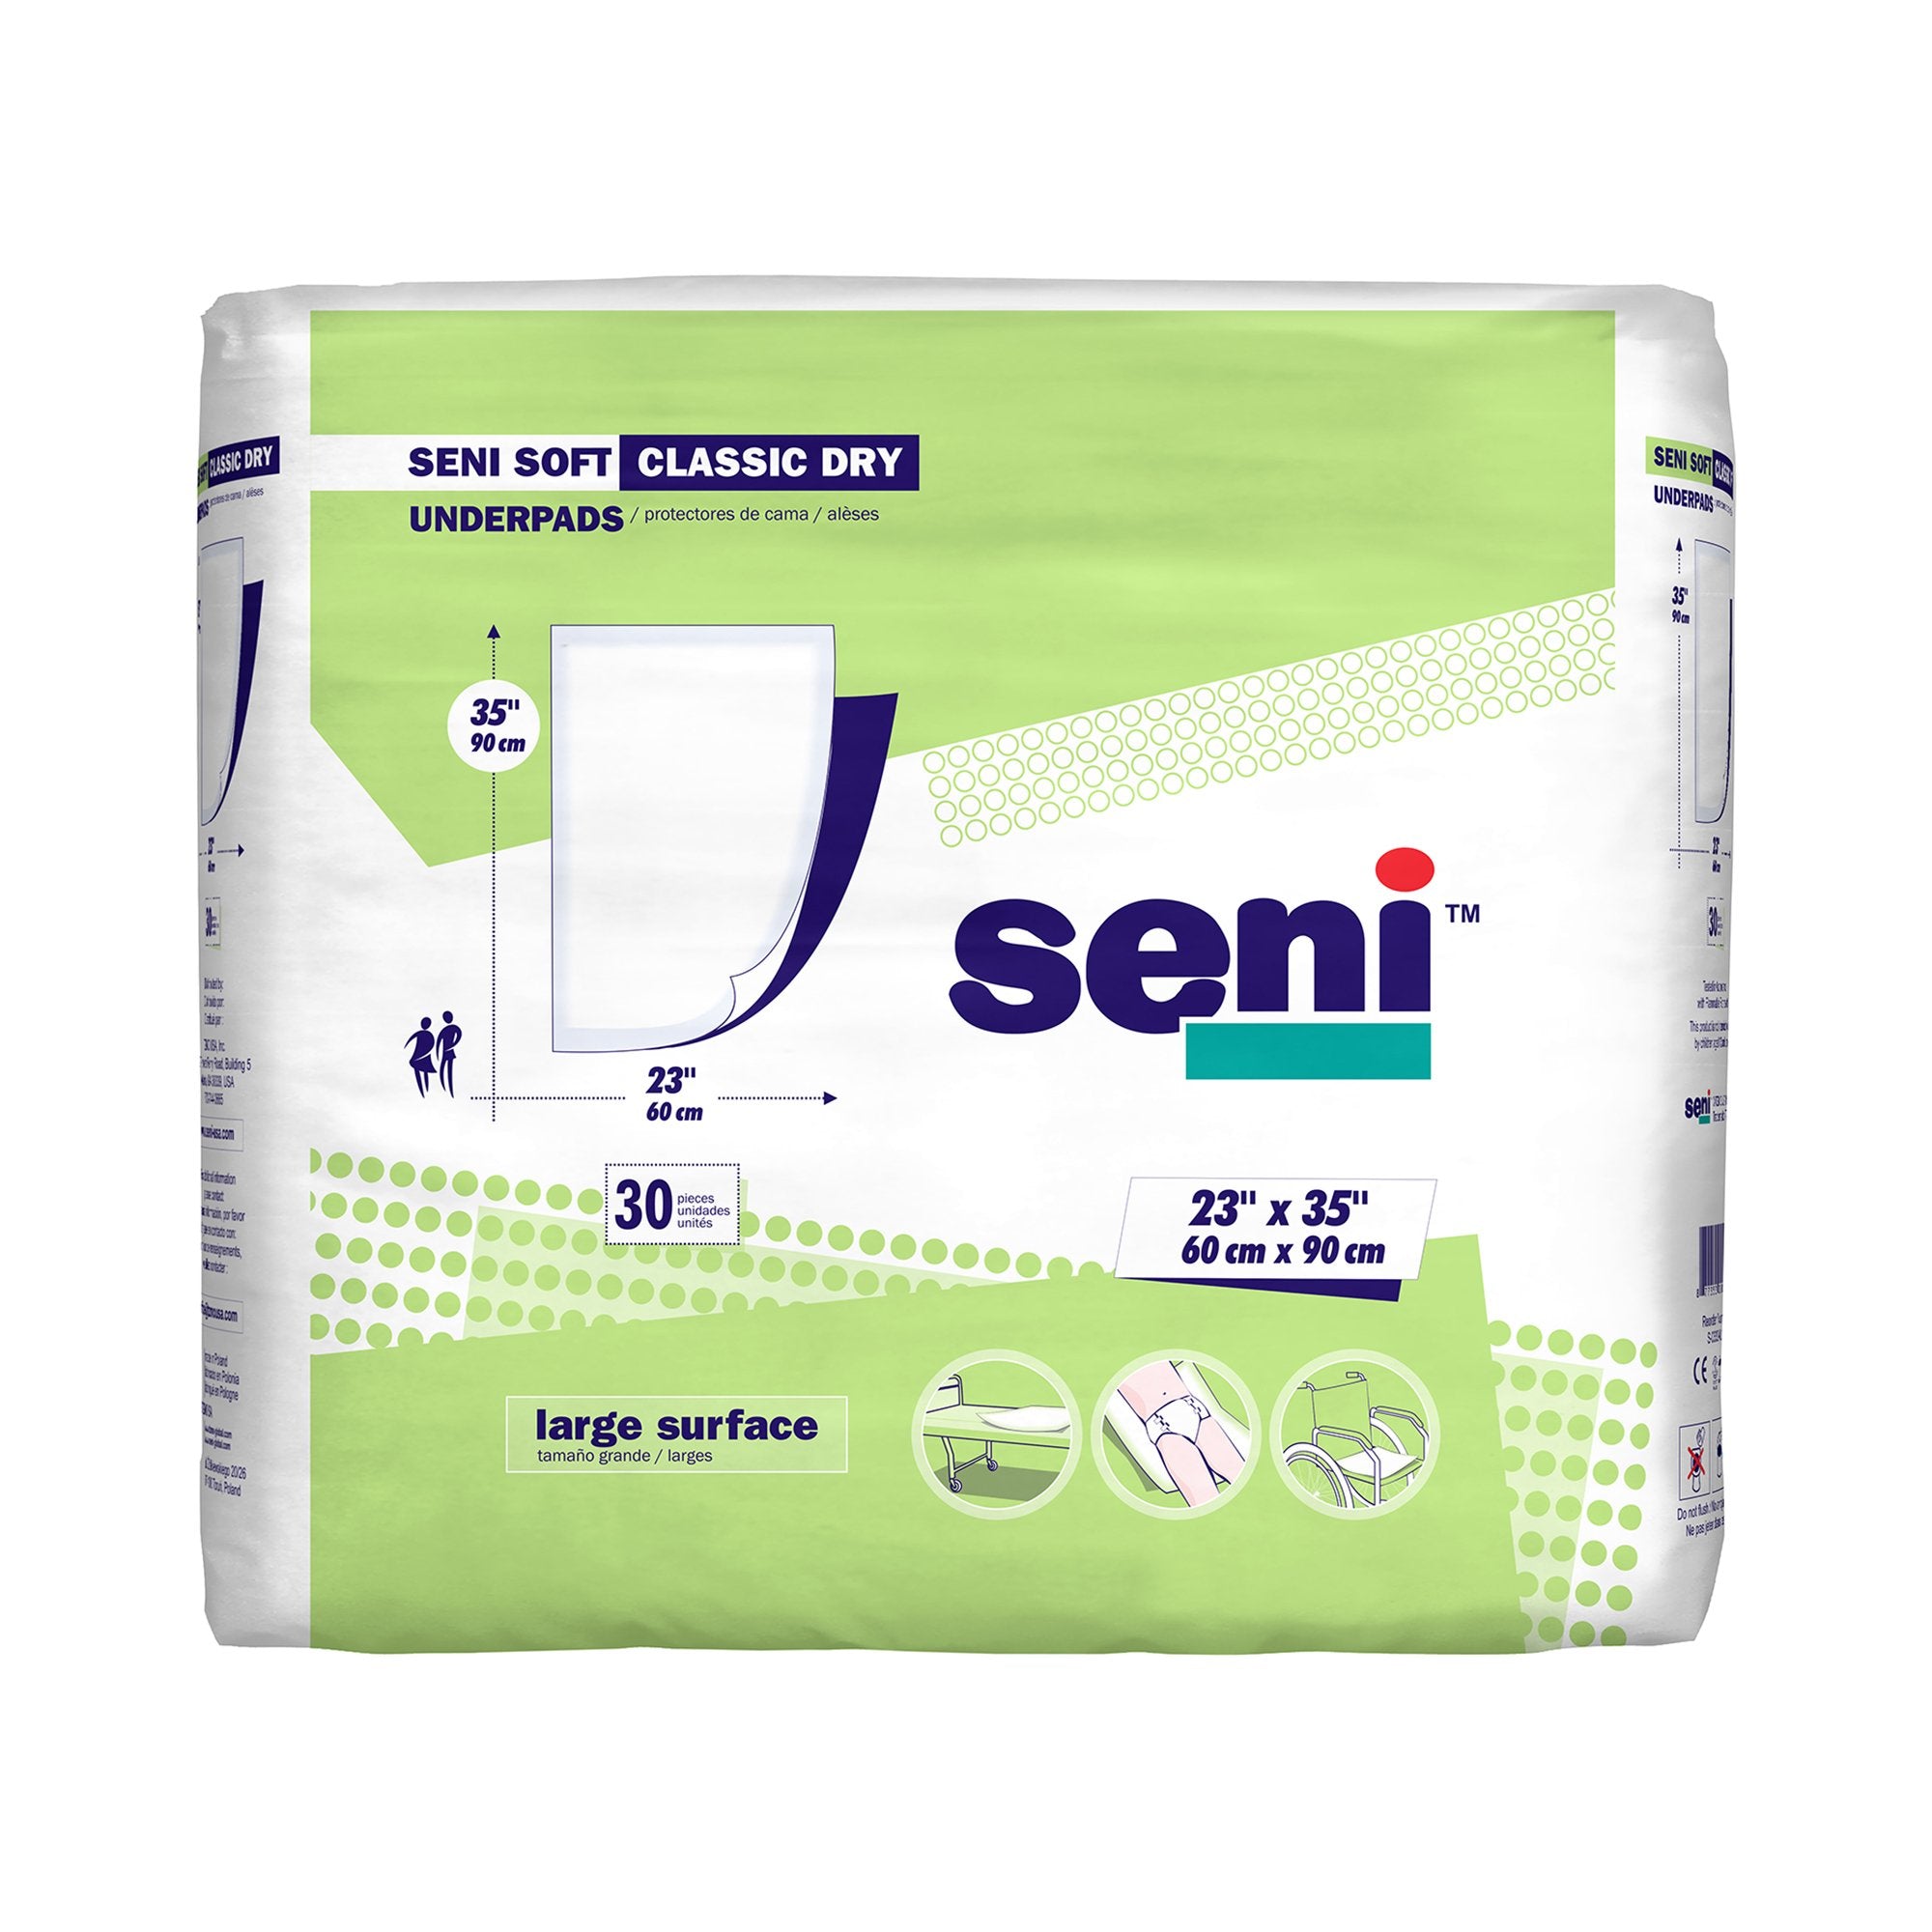 Disposable Underpad Seni Soft Classic Dry 23 X 35 Inch Cellulose Pulp / Super Absorbent Polymer Light Absorbency